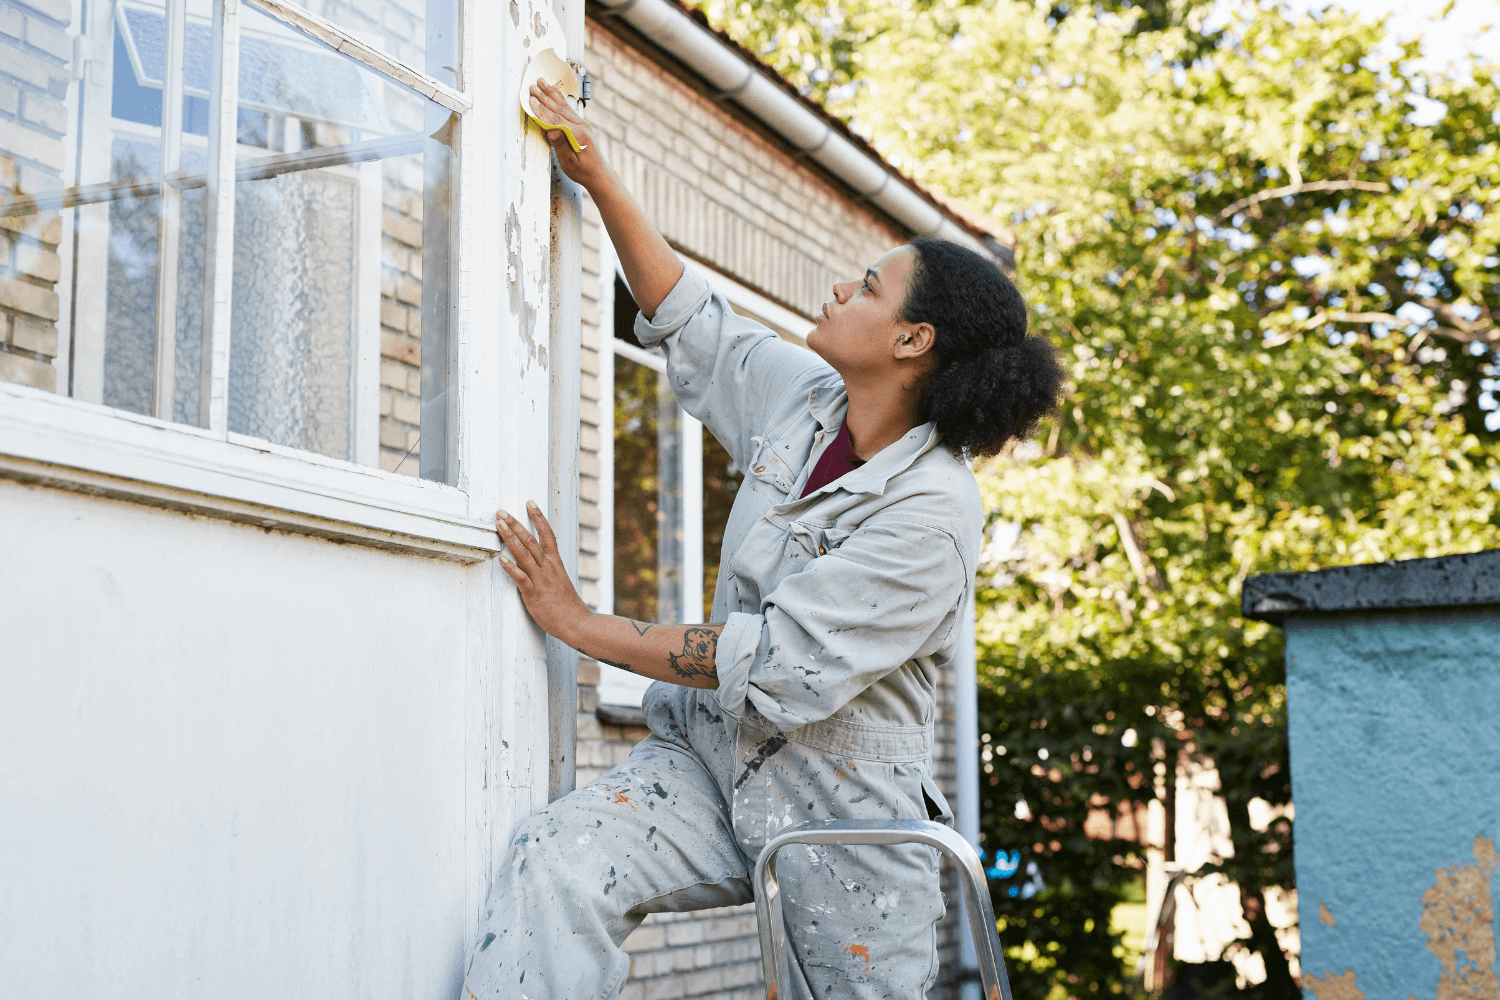 Young woman working on the exterior of a house